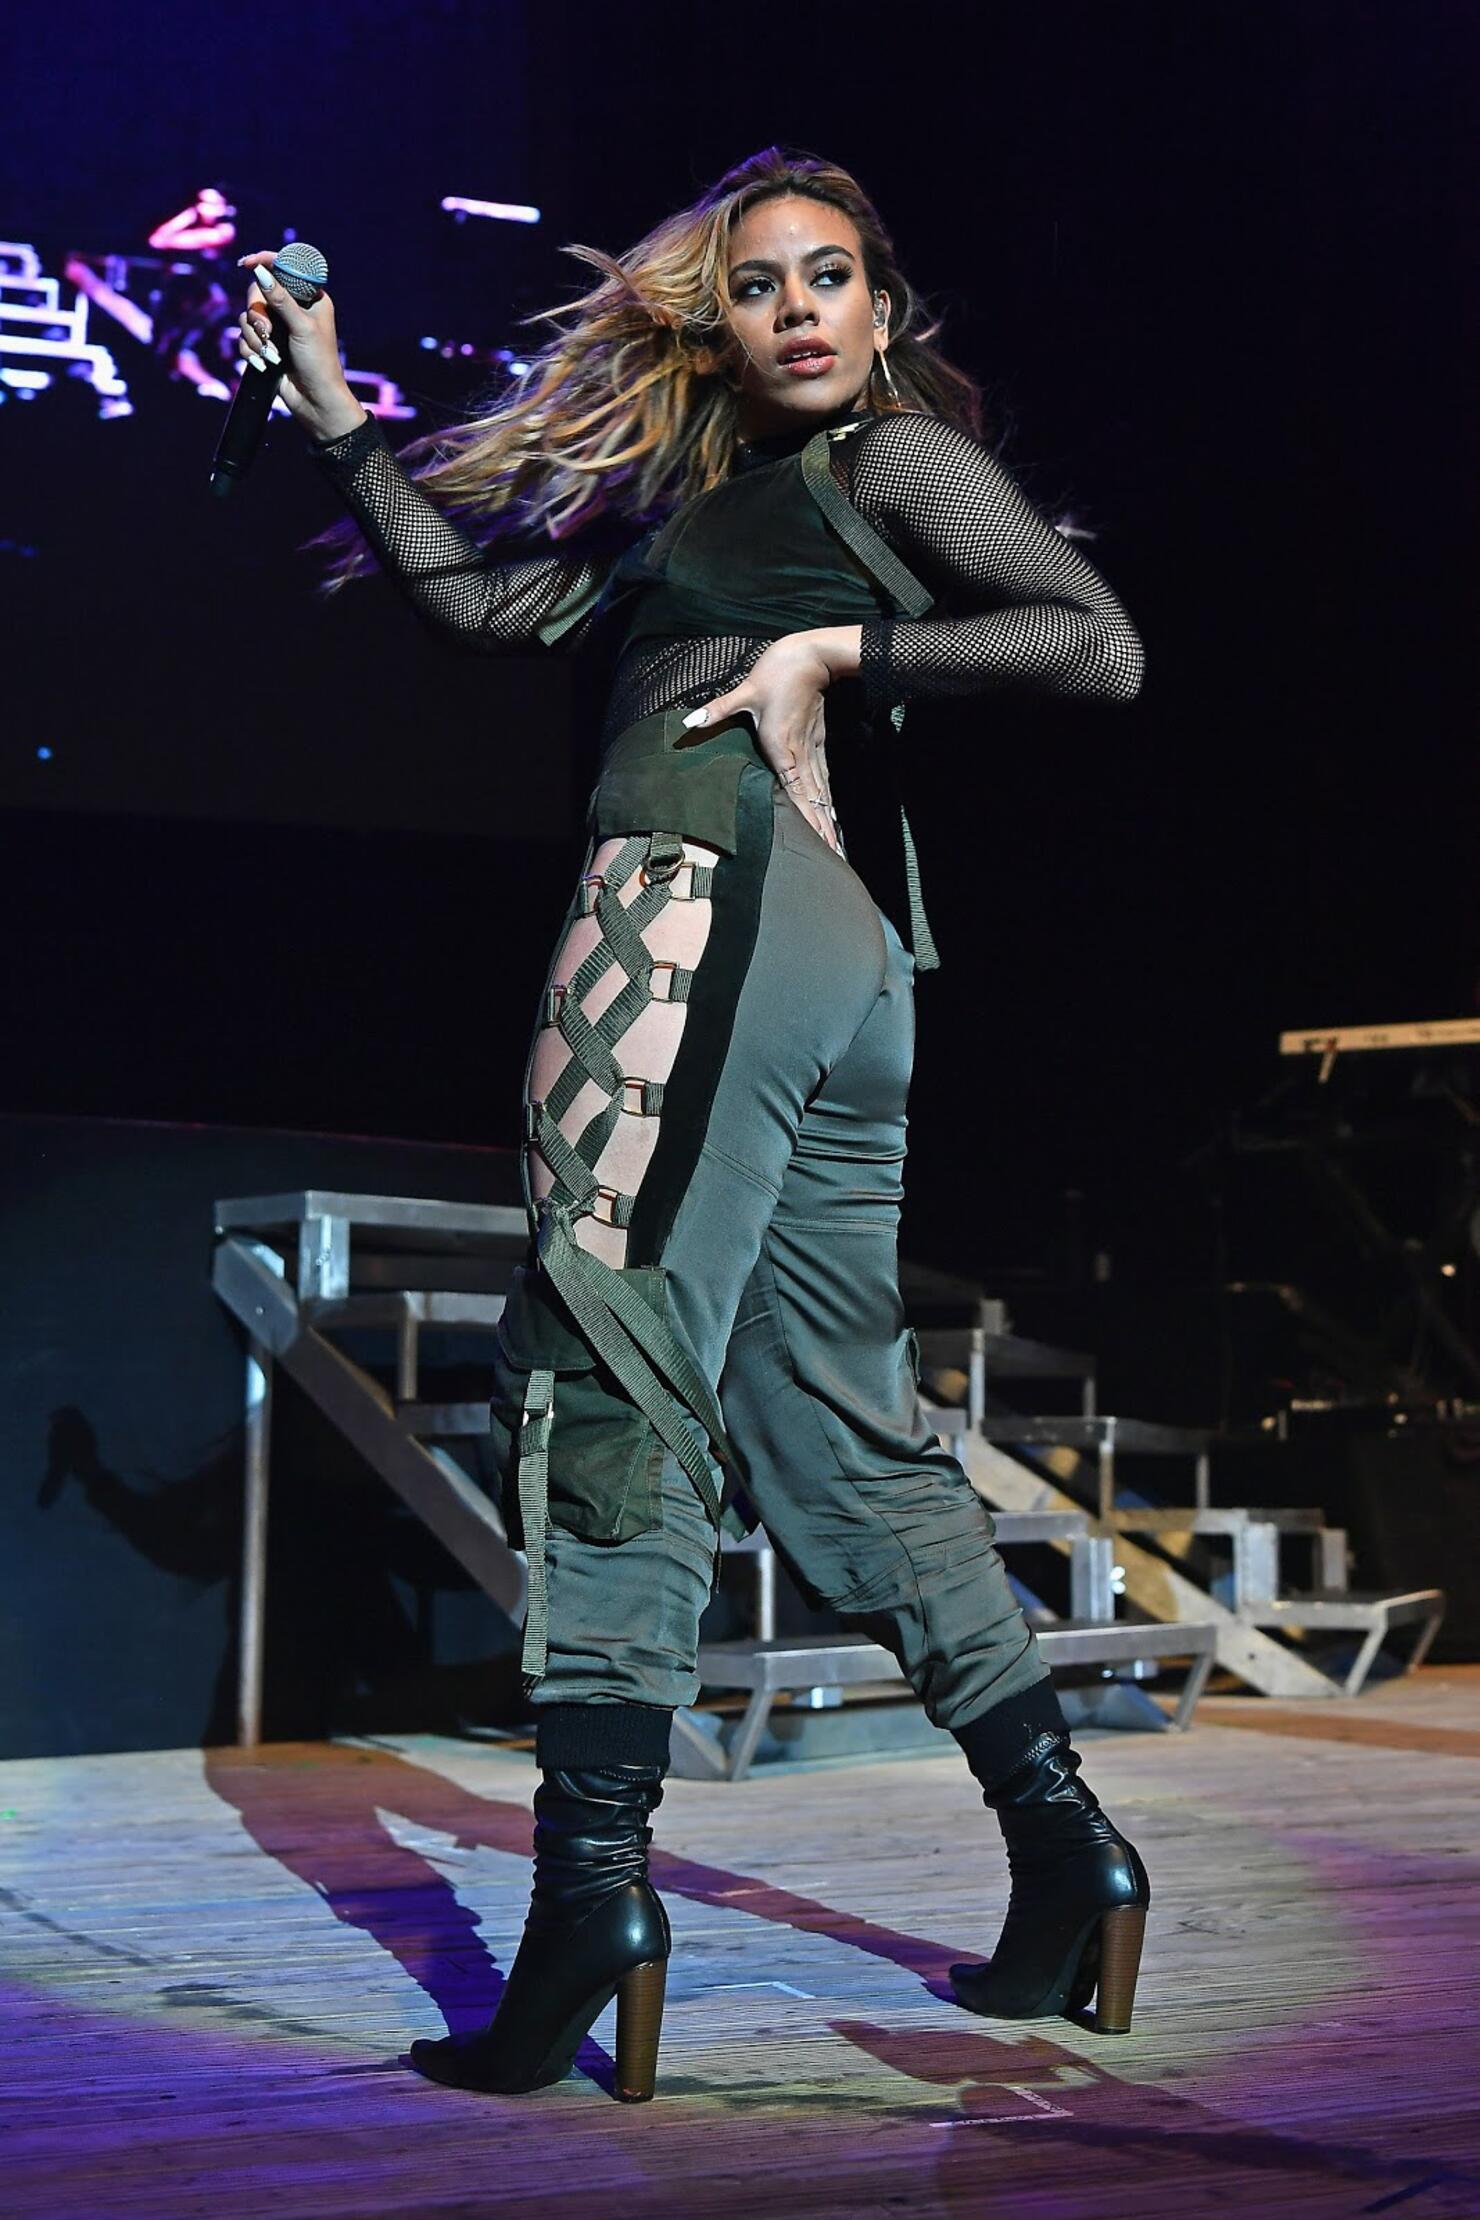 20 Facts You Didn't Know About Dinah Jane | iHeart